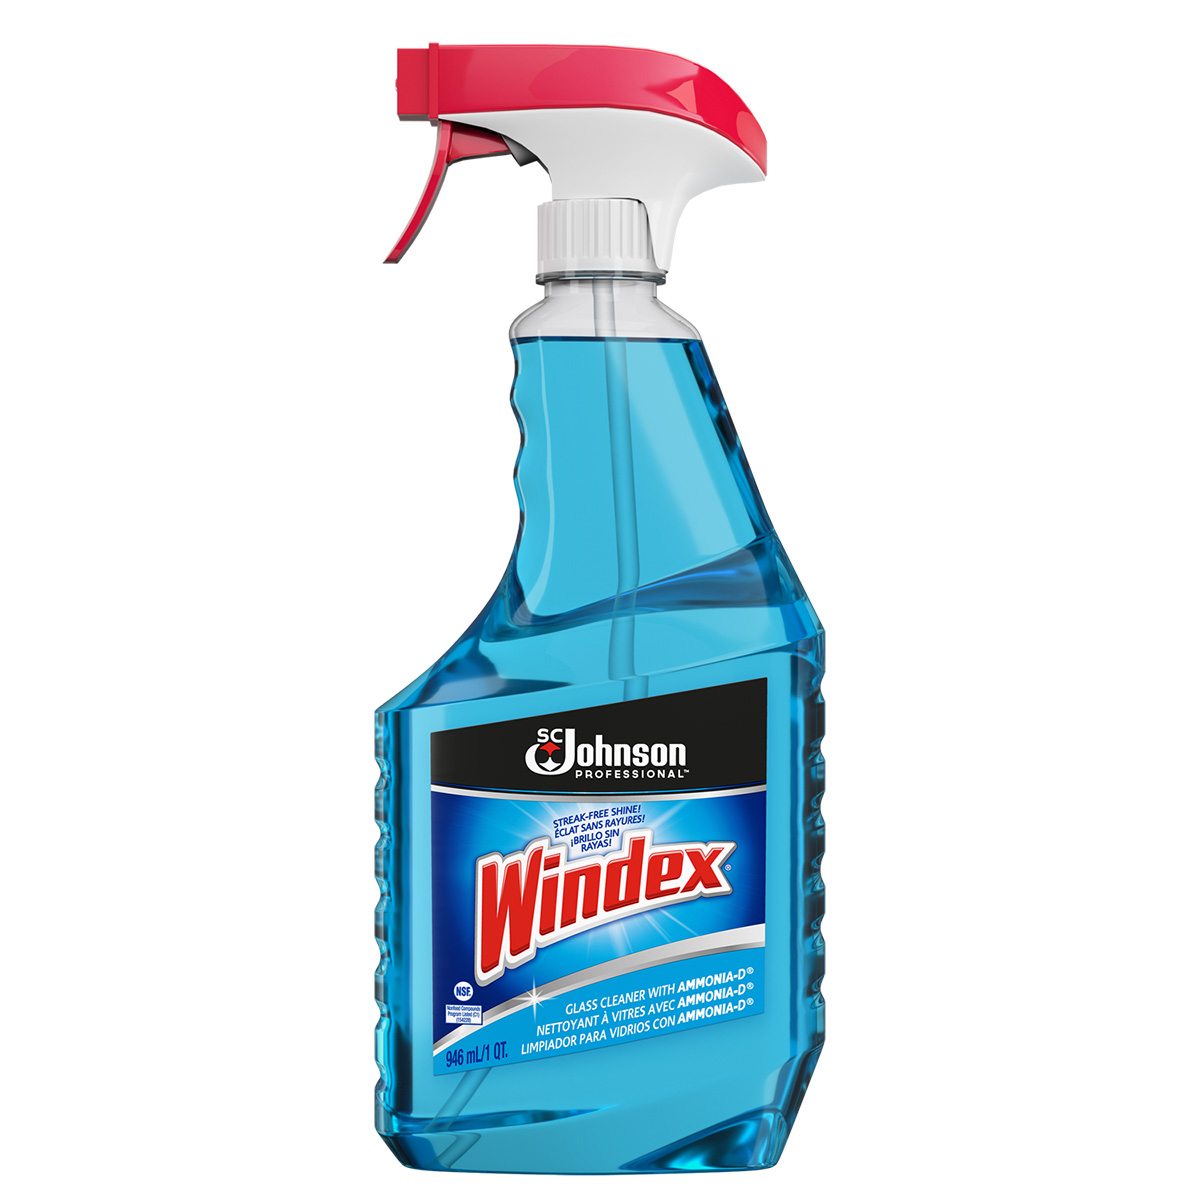 Windex Pro Glass Cleaner Imperial Soap